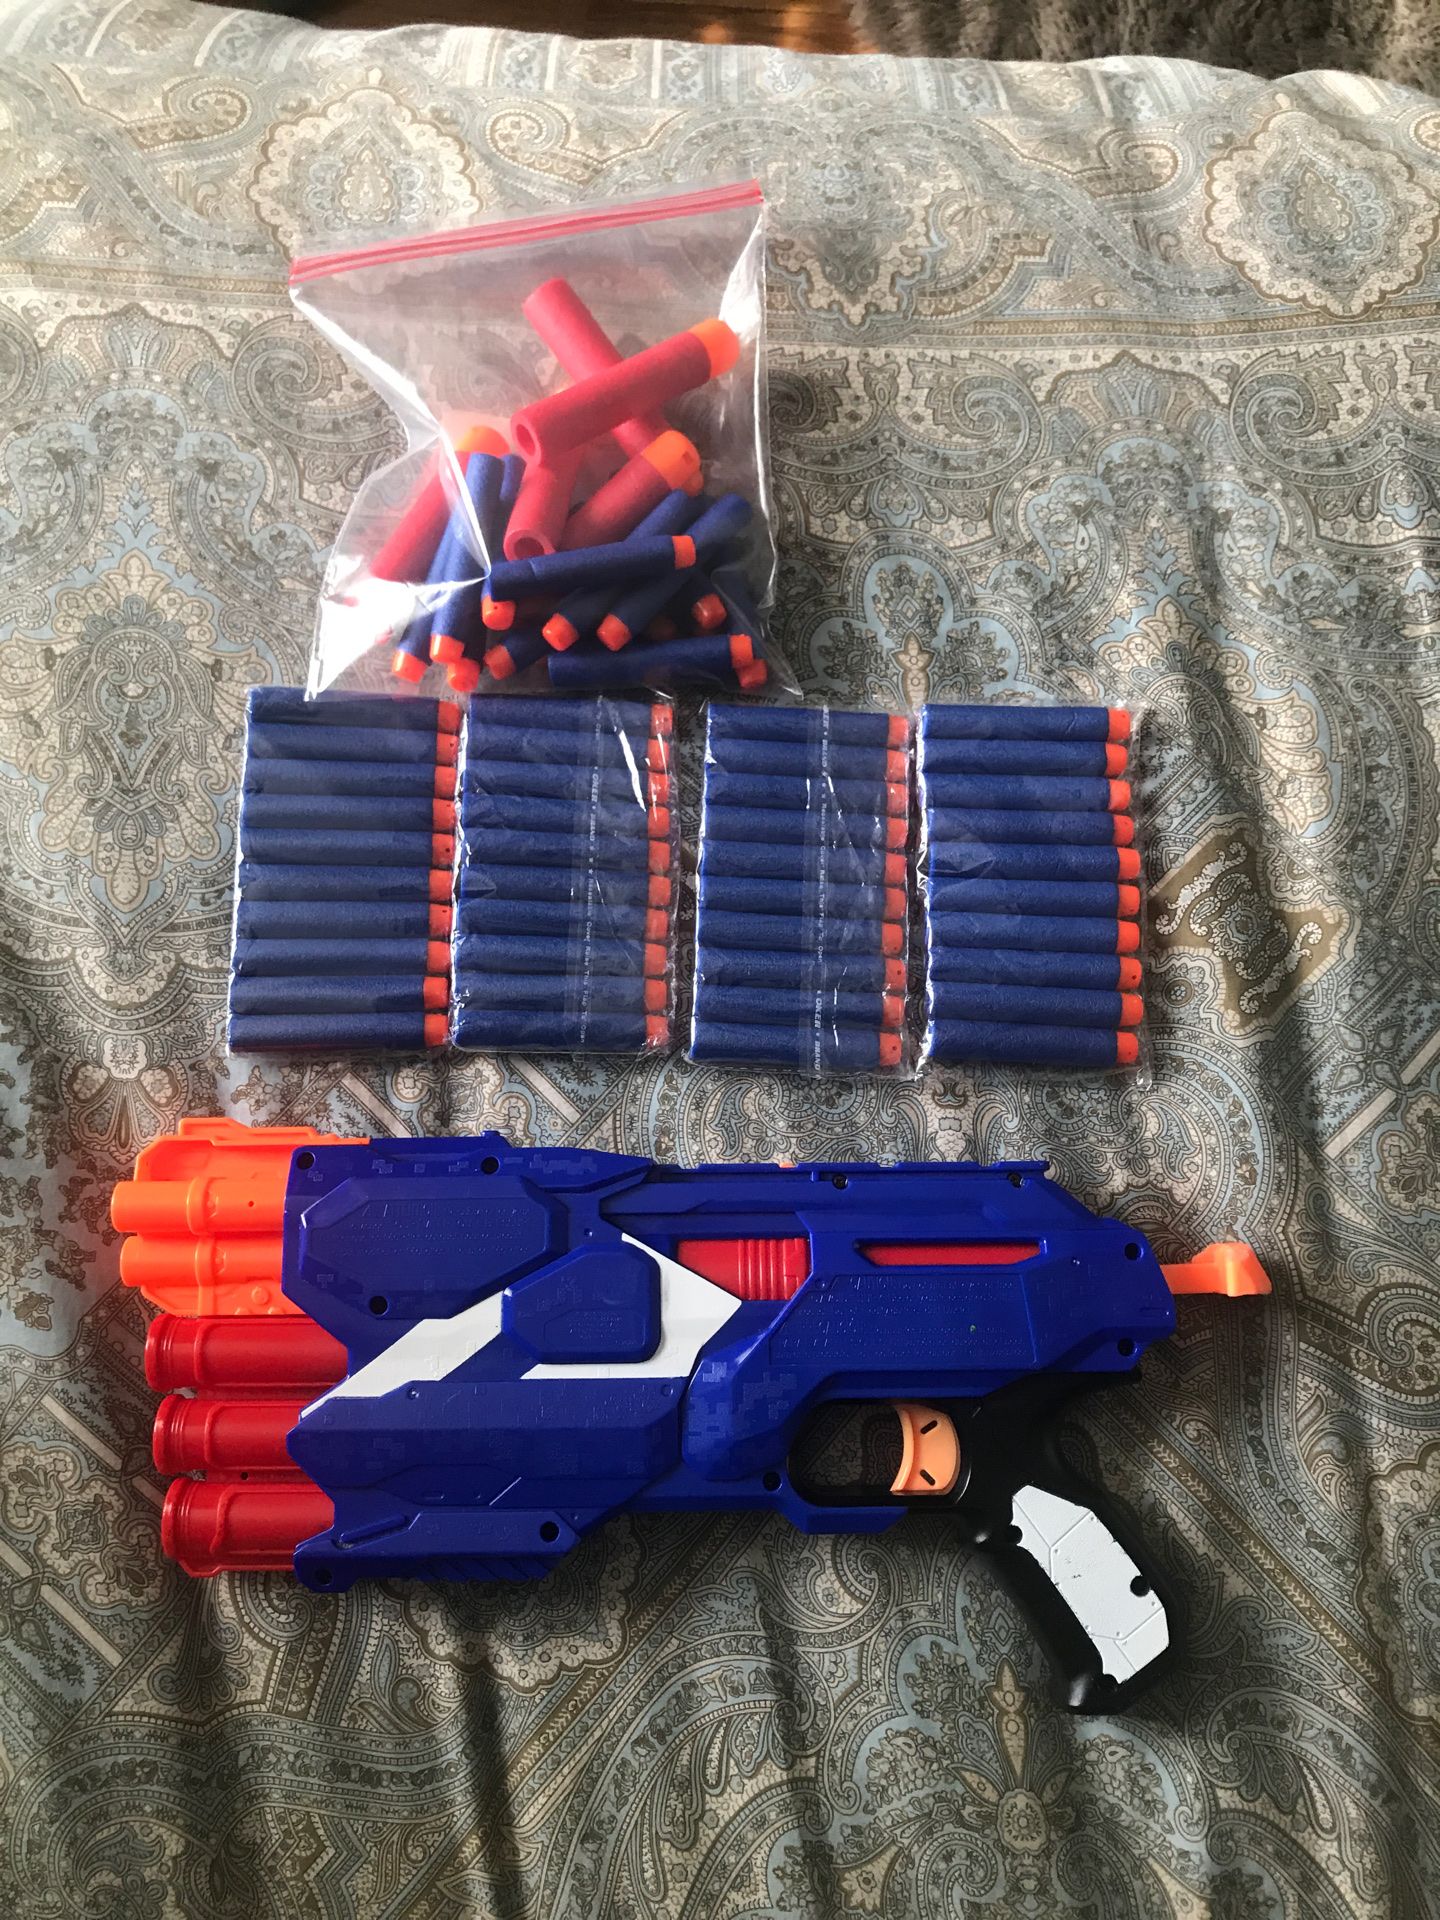 Nerf gun with 54 bullets